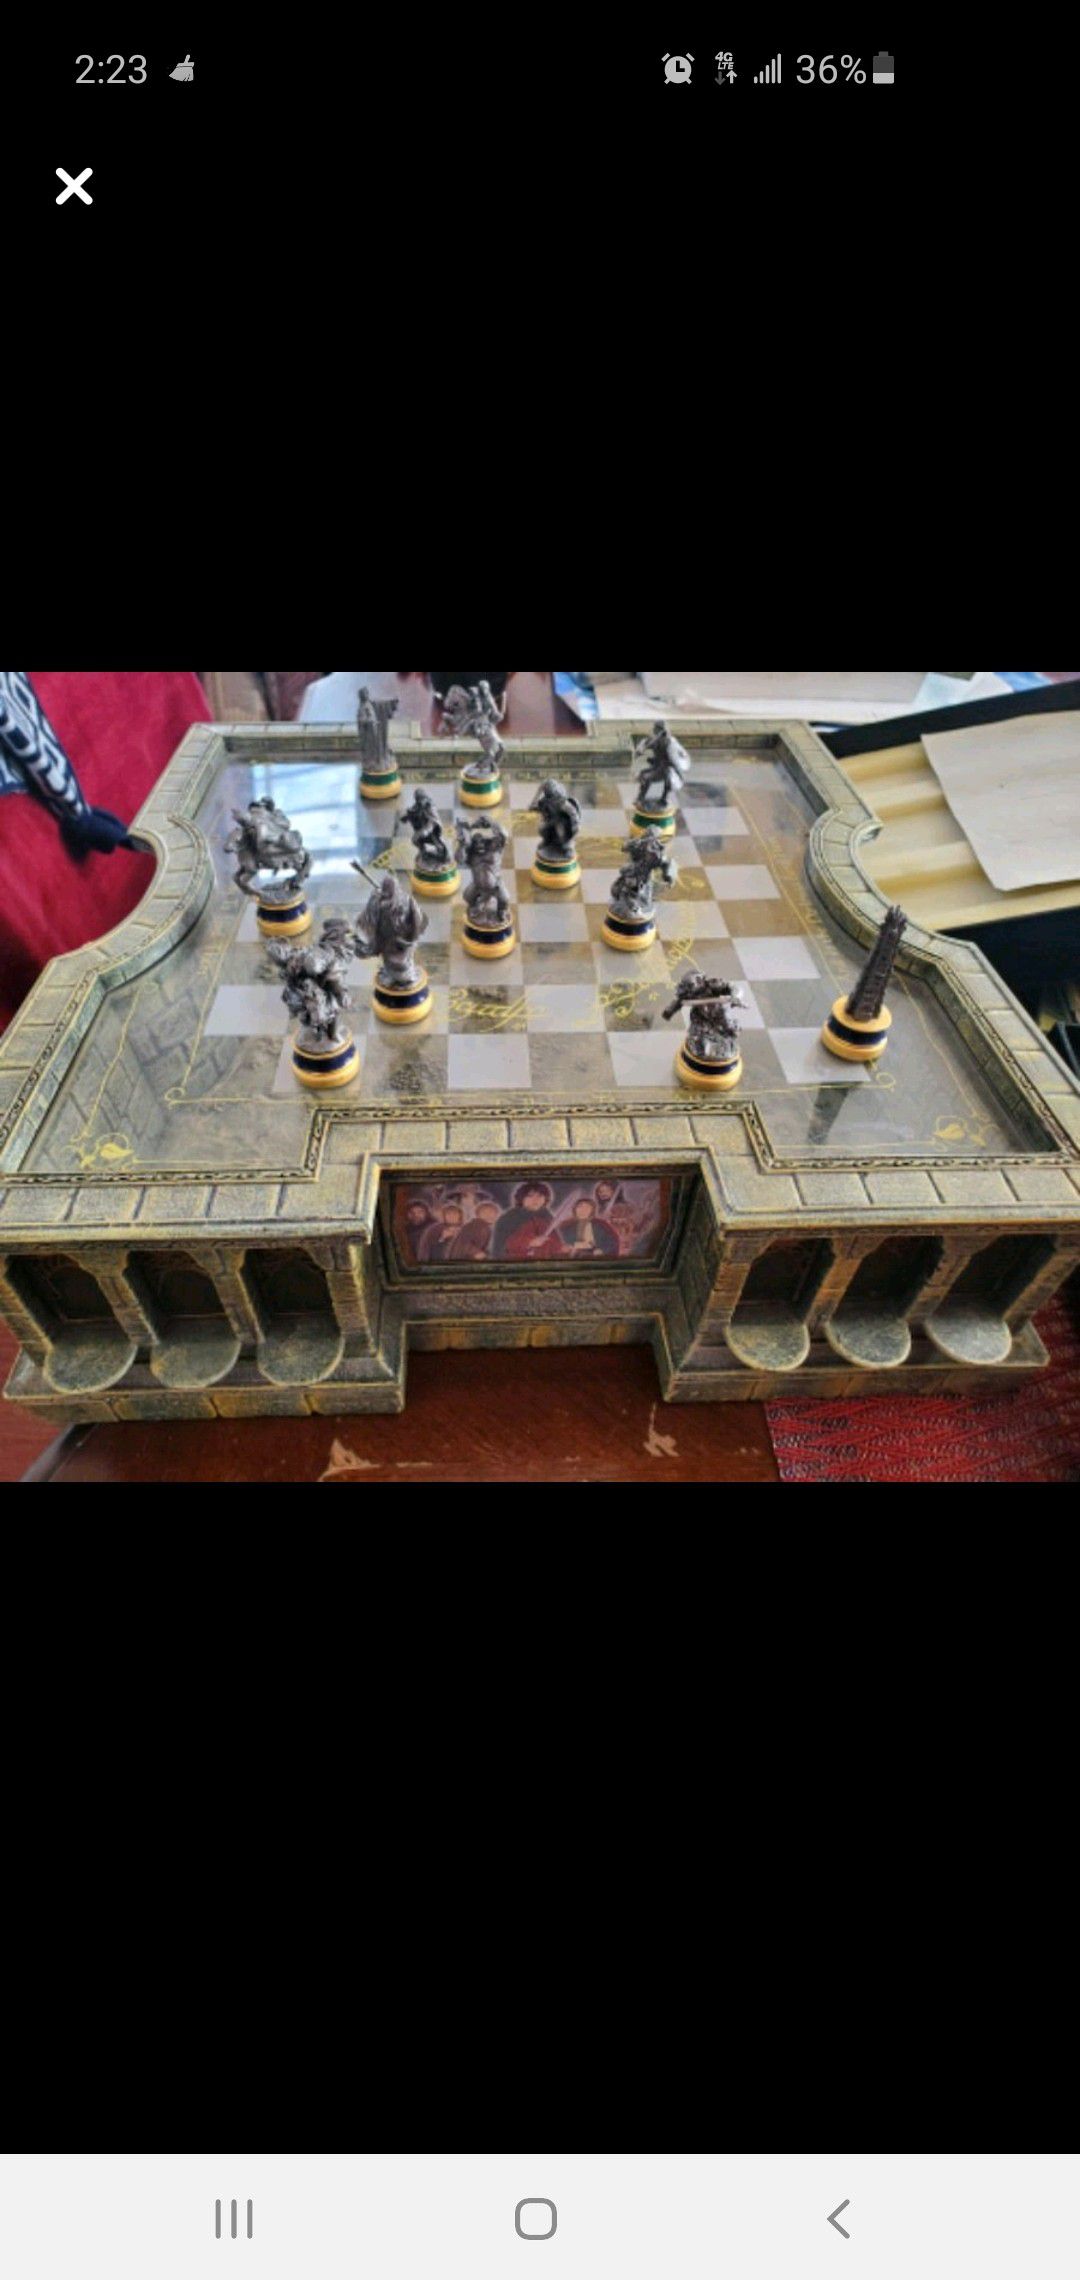 Lord of the rings chess set